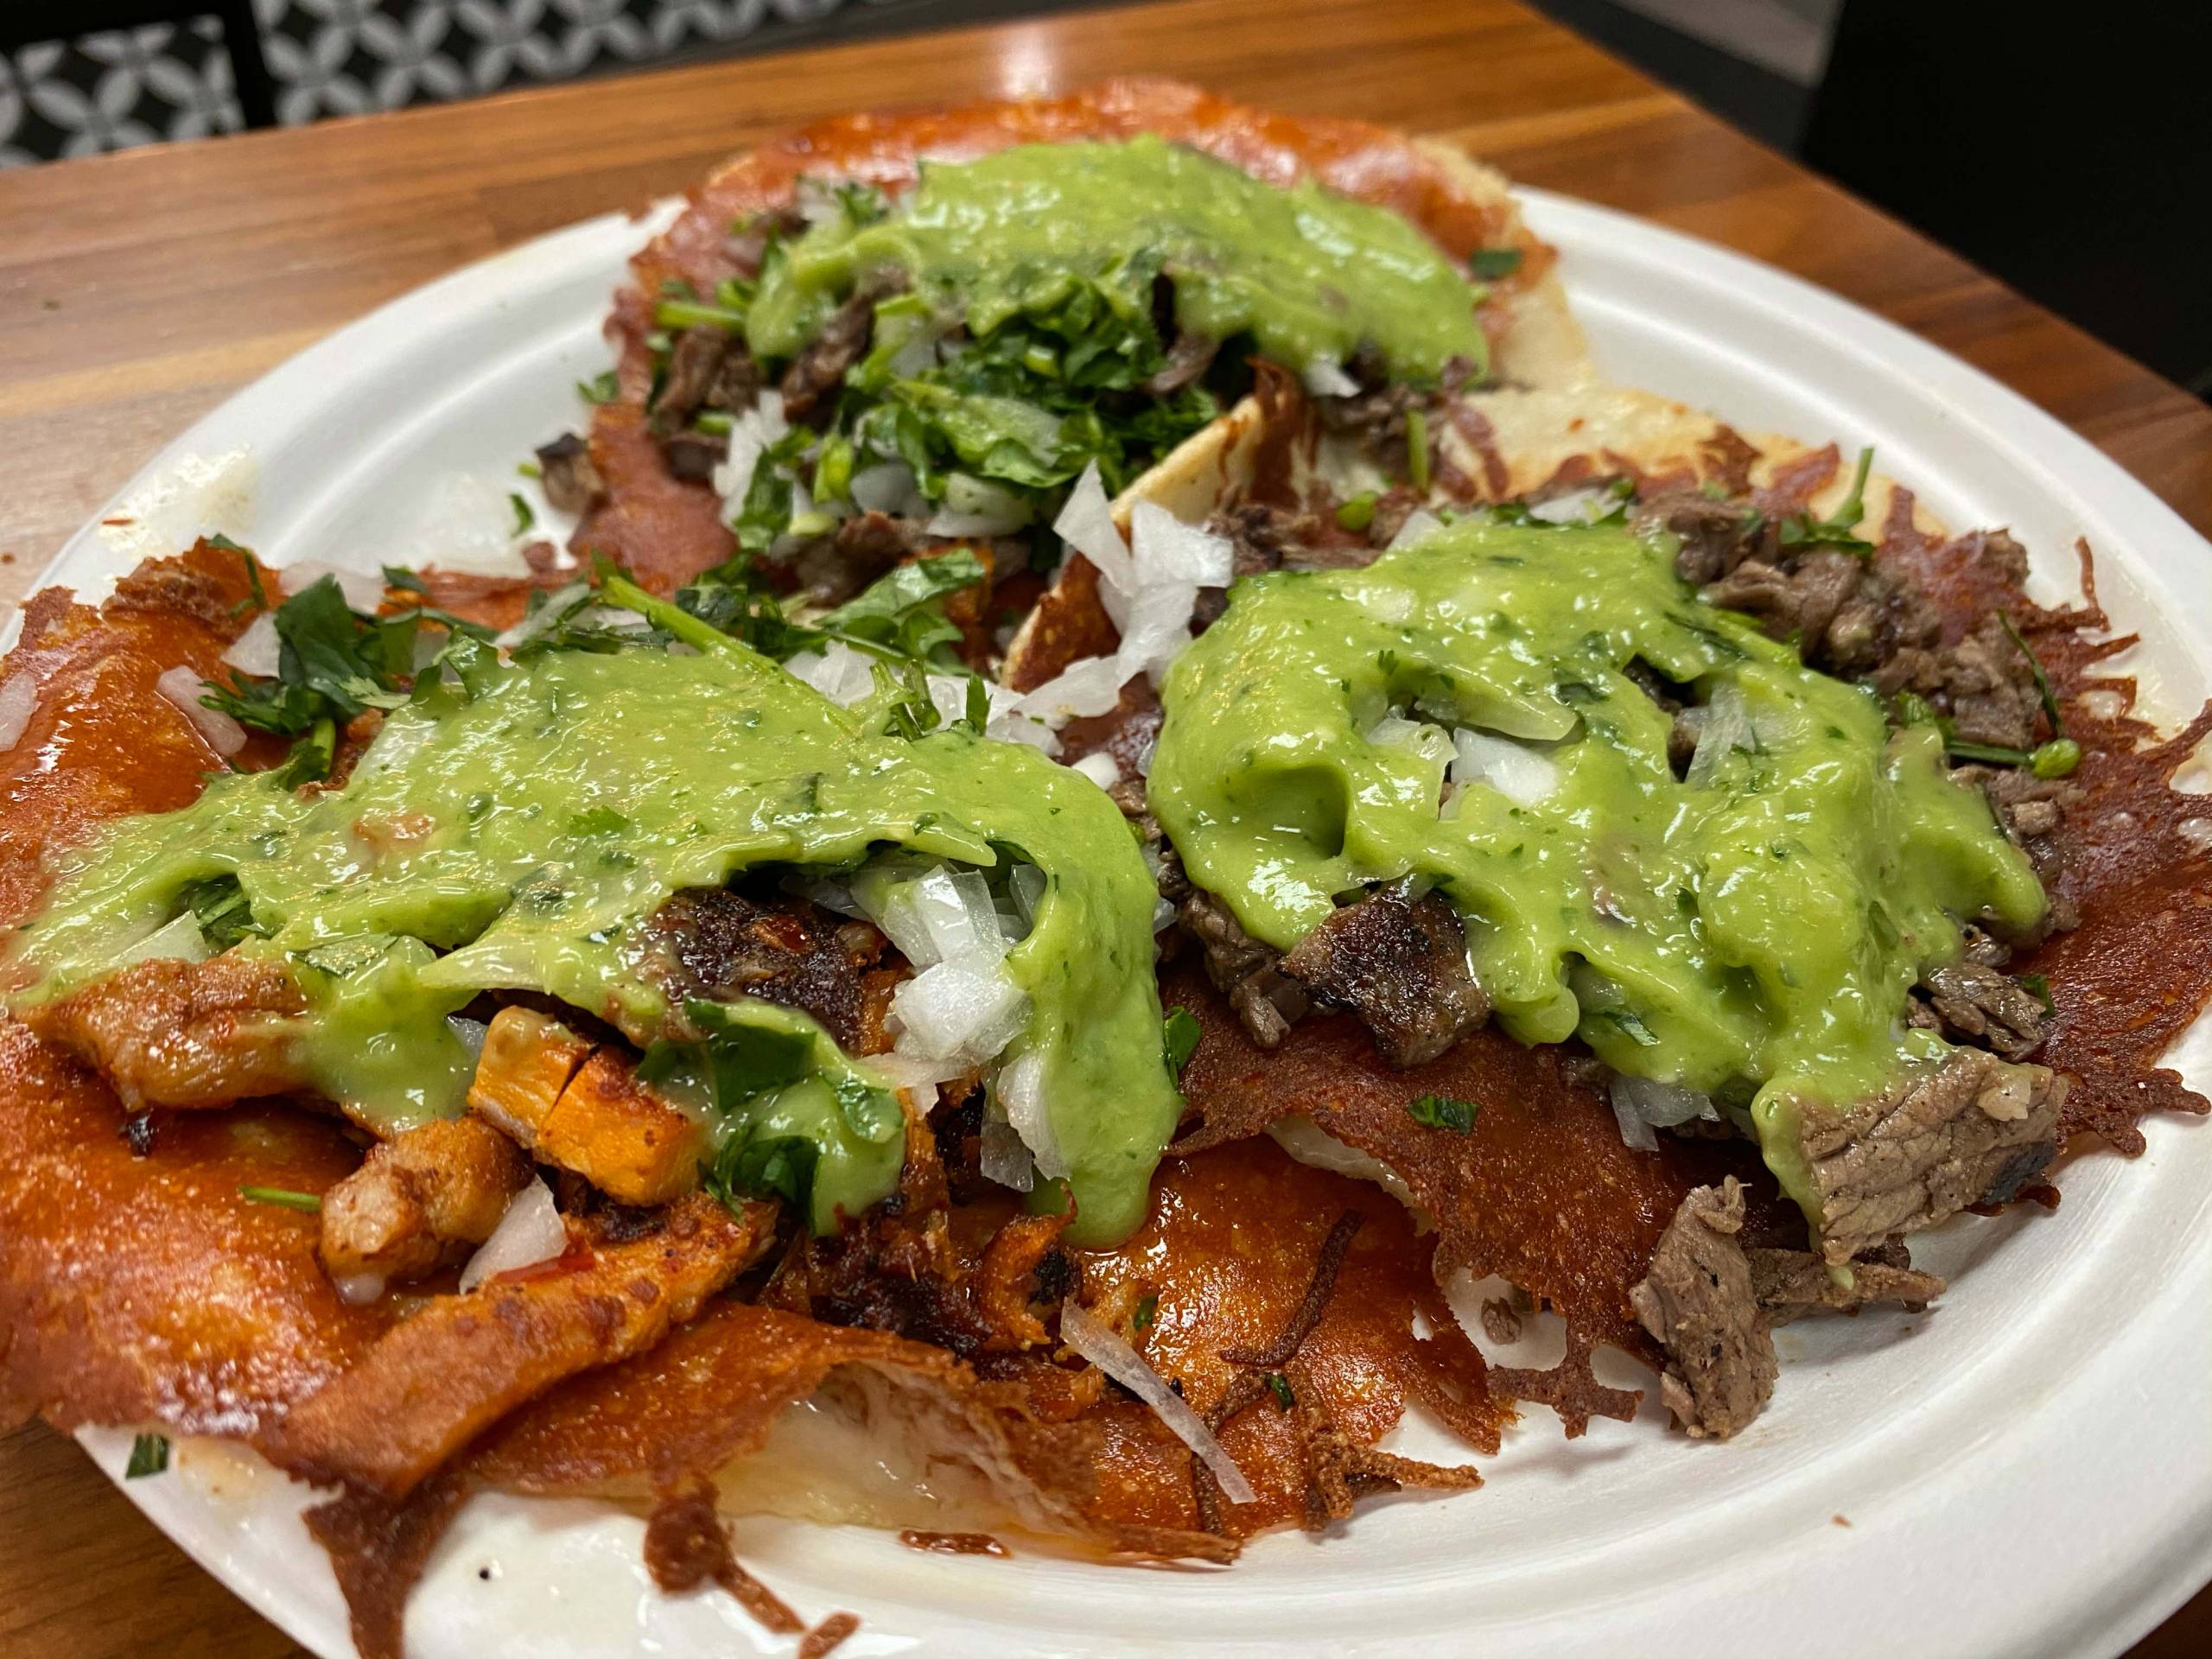 Three tacos, topped with guacamole and crispy cheese, on a paper plate.